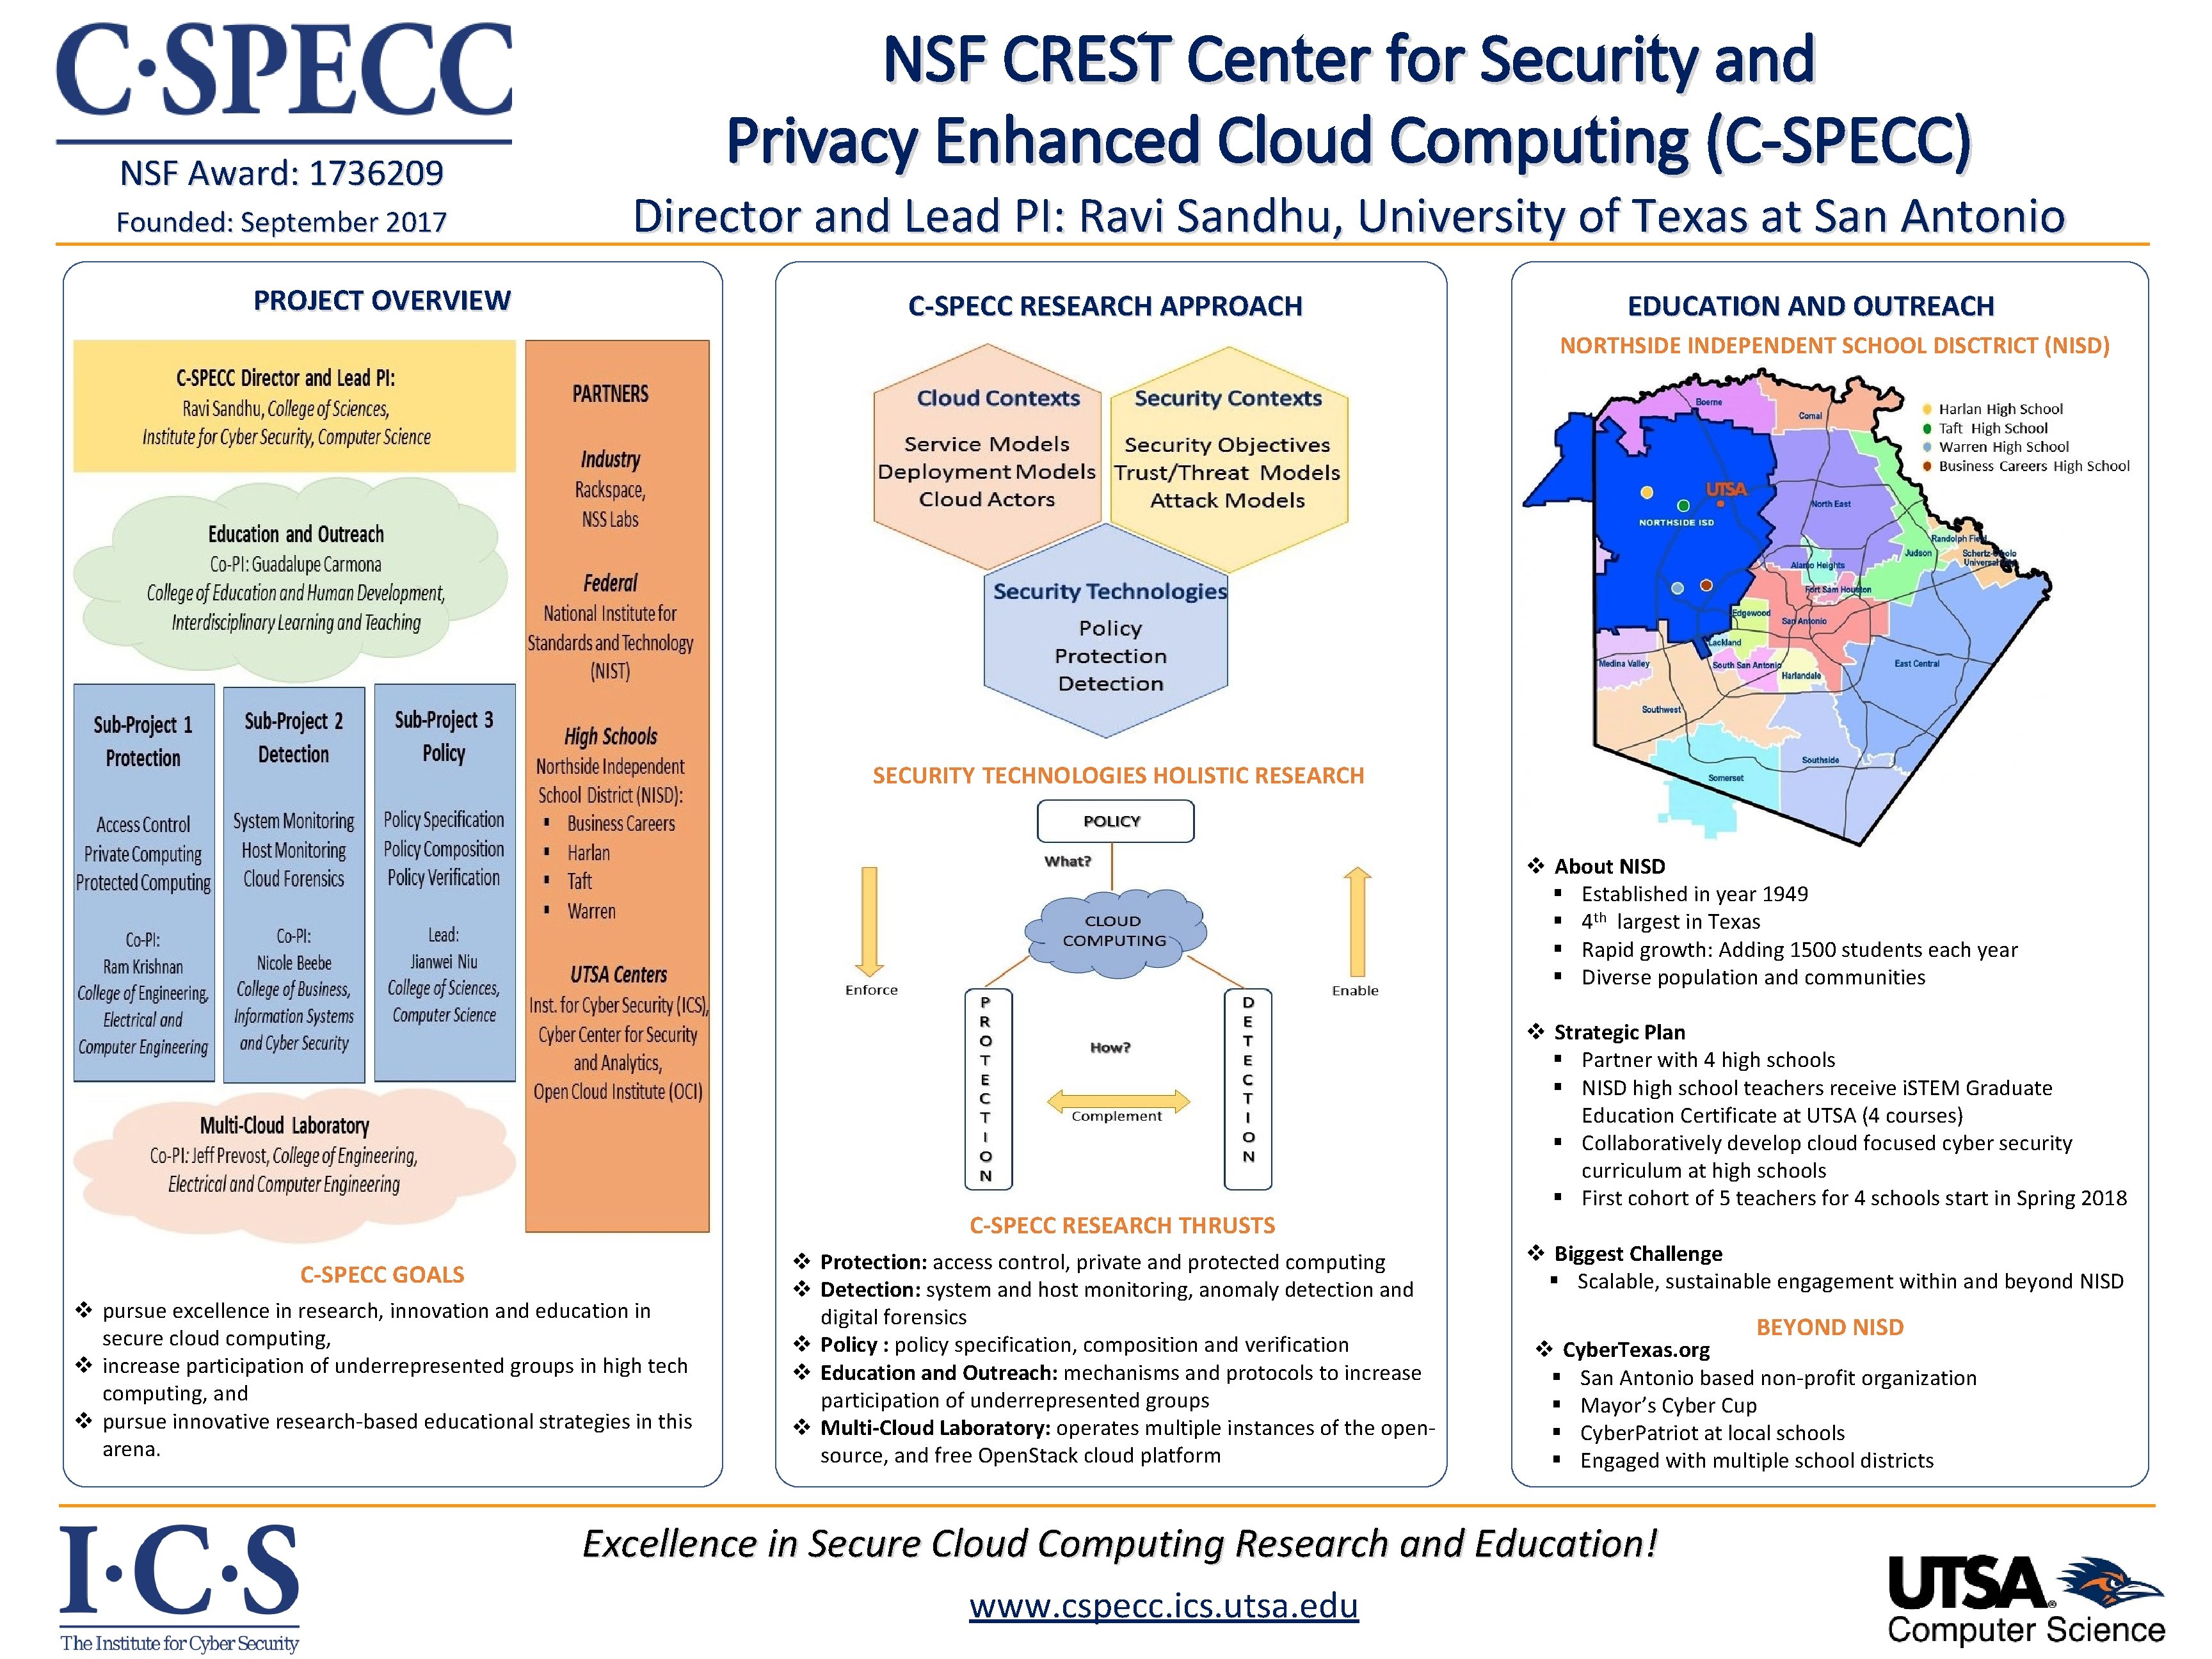 NSF Award: 1736209 Founded: September 2017 NSF CREST Center for Security and Privacy Enhanced